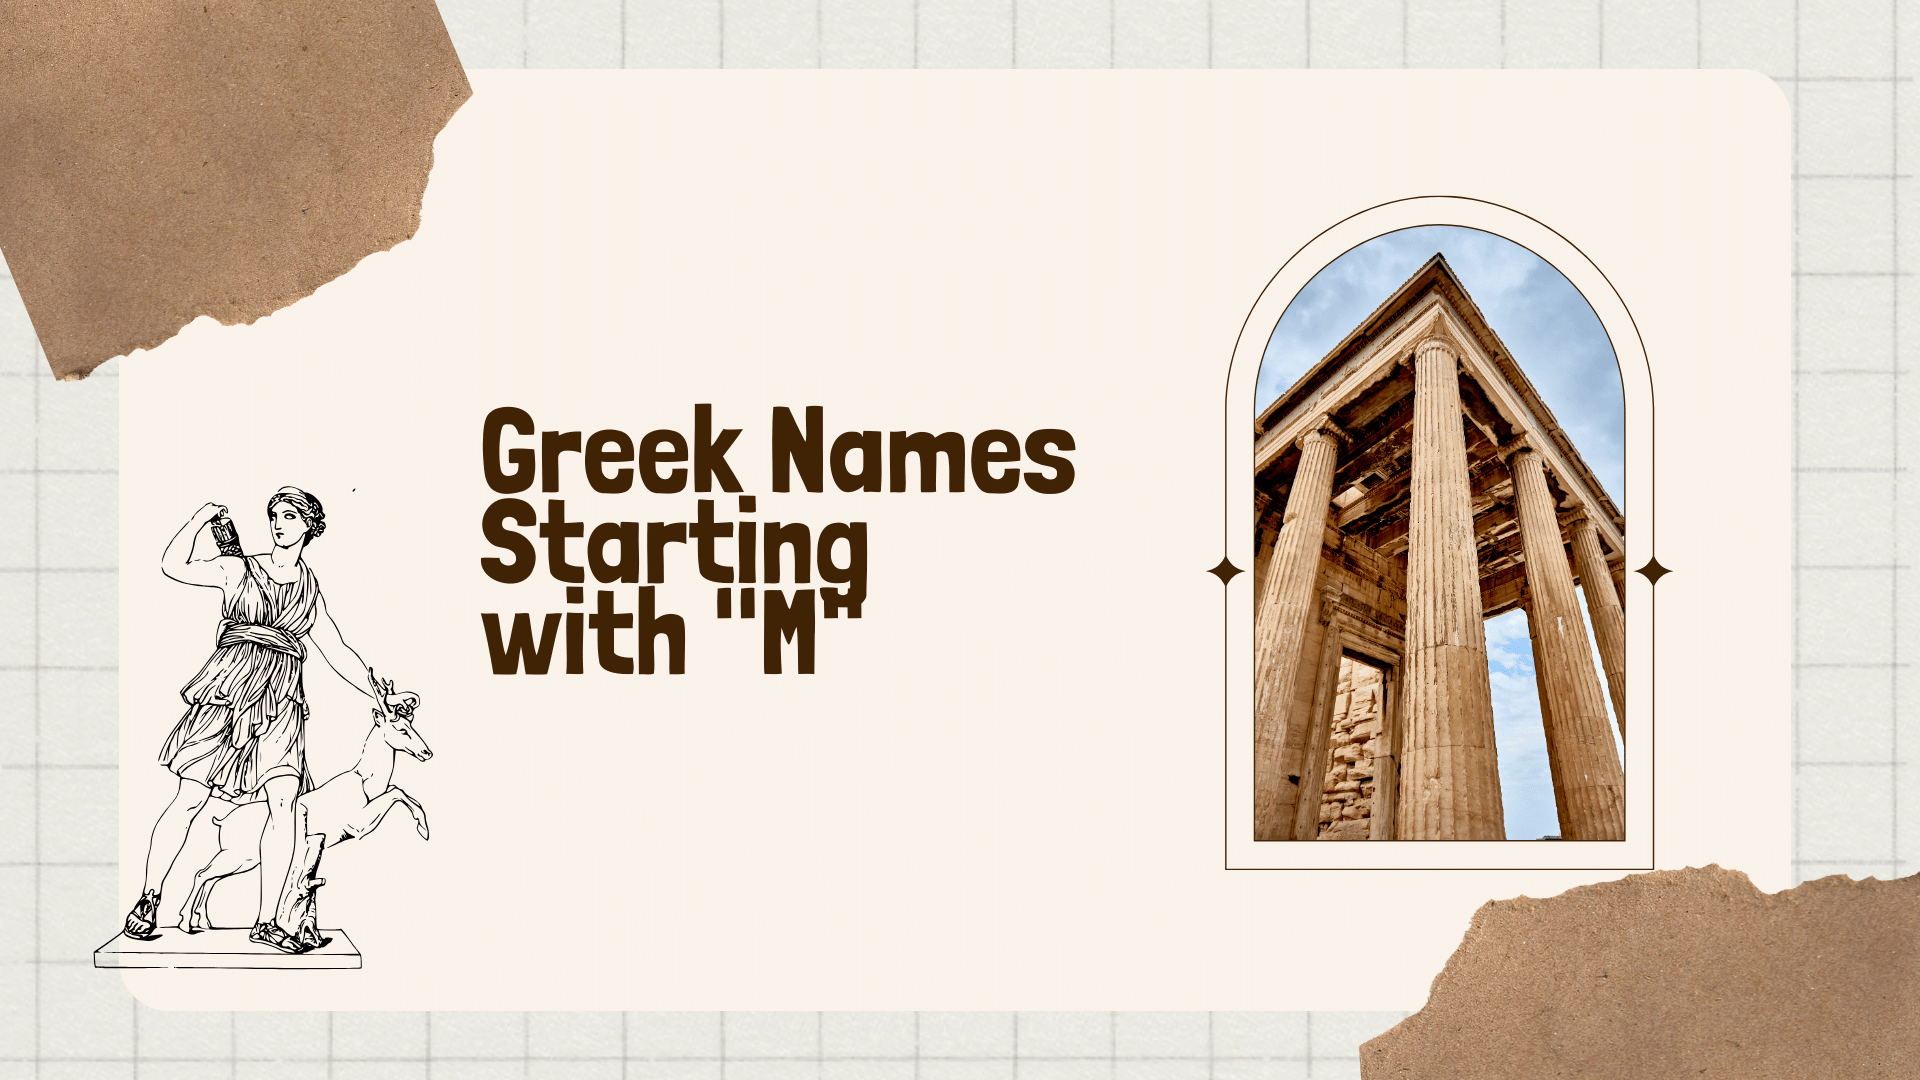 Greek Names Starting With "M"